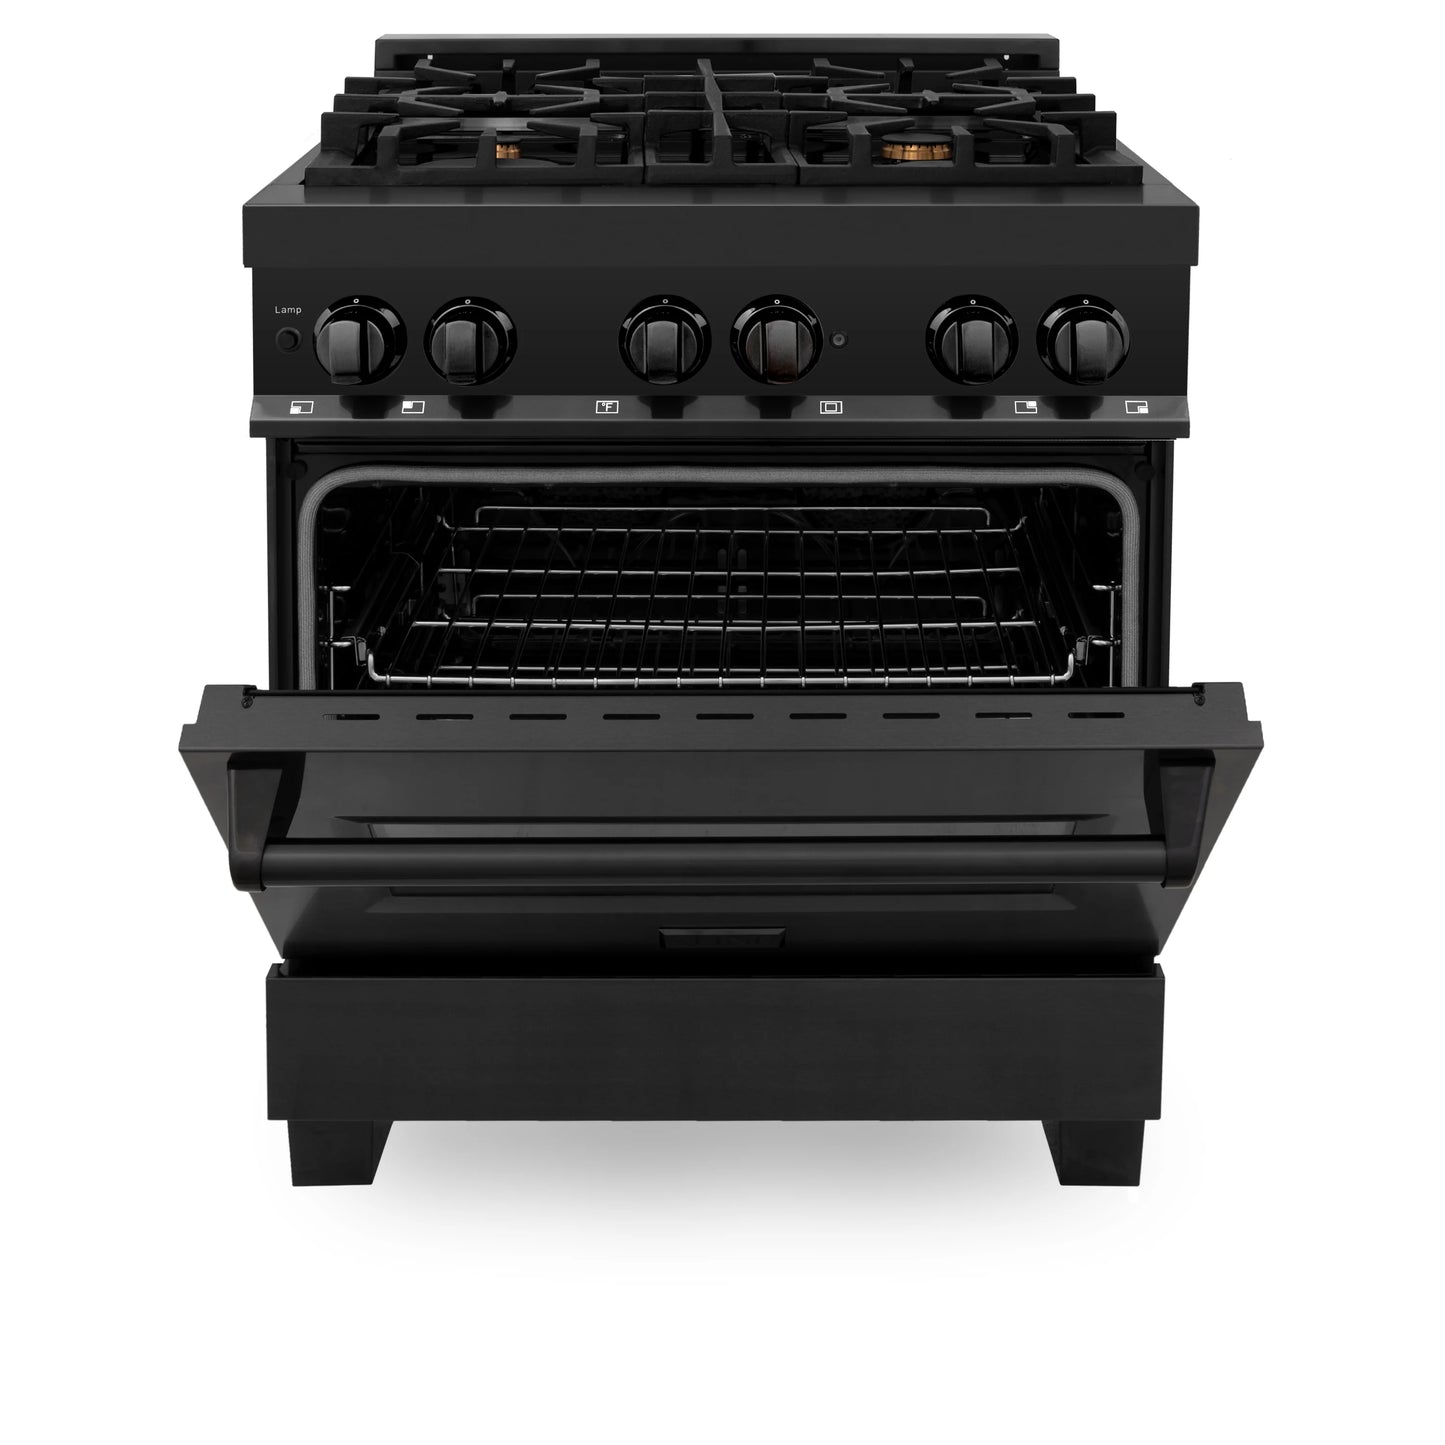 ZLINE 30 in. Dual Fuel Range with Gas Stove and Electric Oven in Black Stainless Steel with Brass Burners (RAB-BR-30)